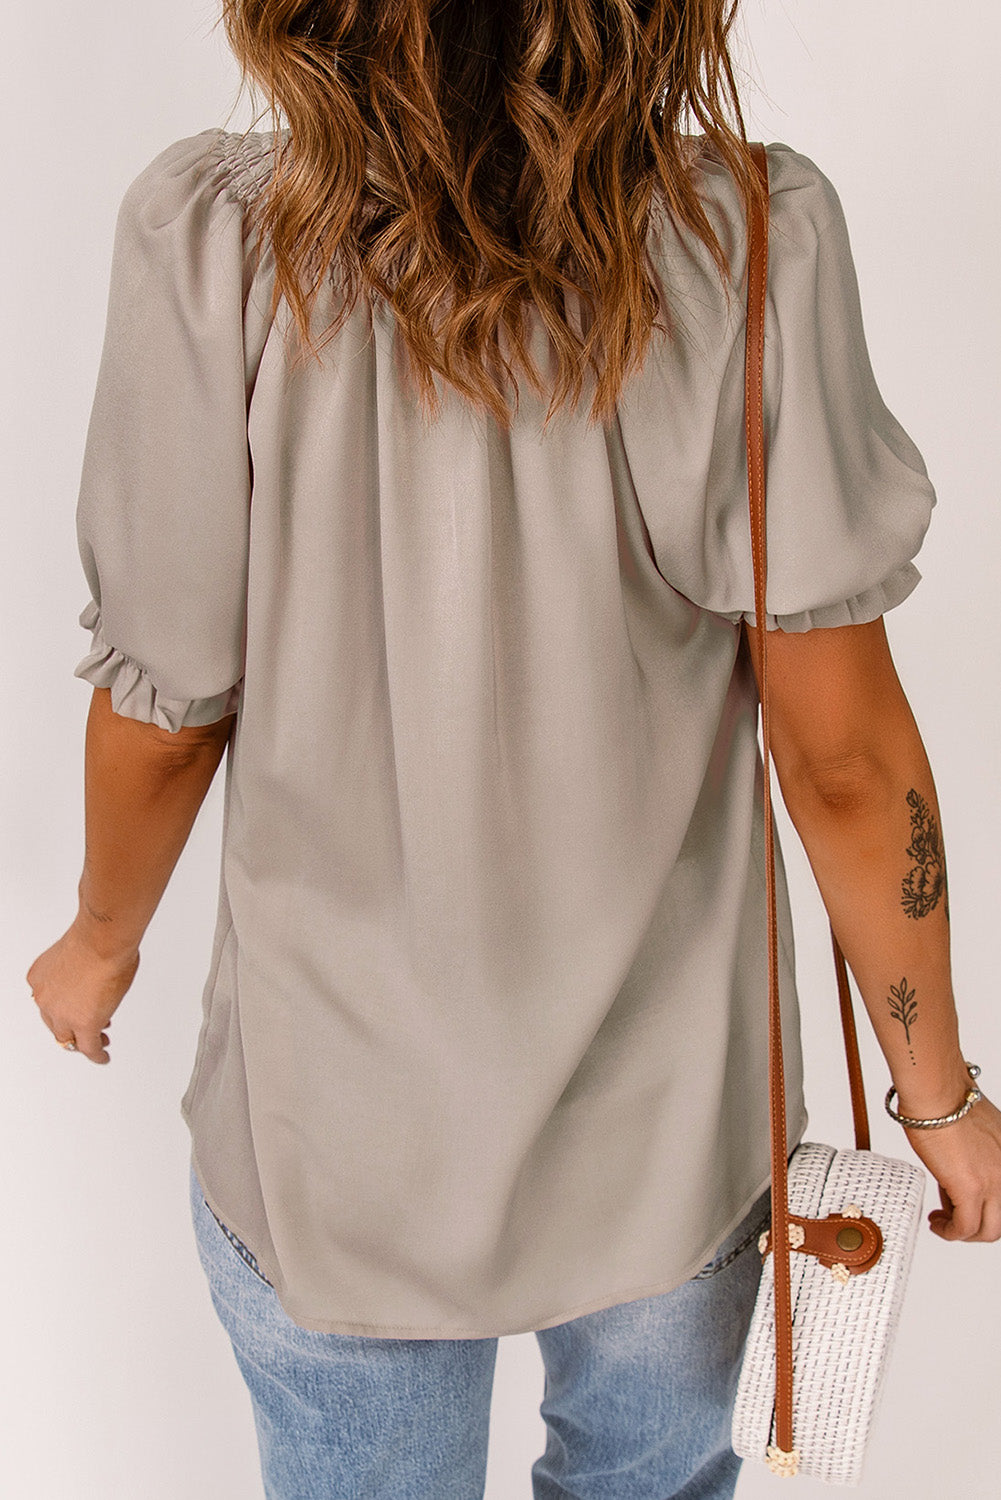 Smocked Frill Trim Flounce Sleeve Blouse - 2 colors